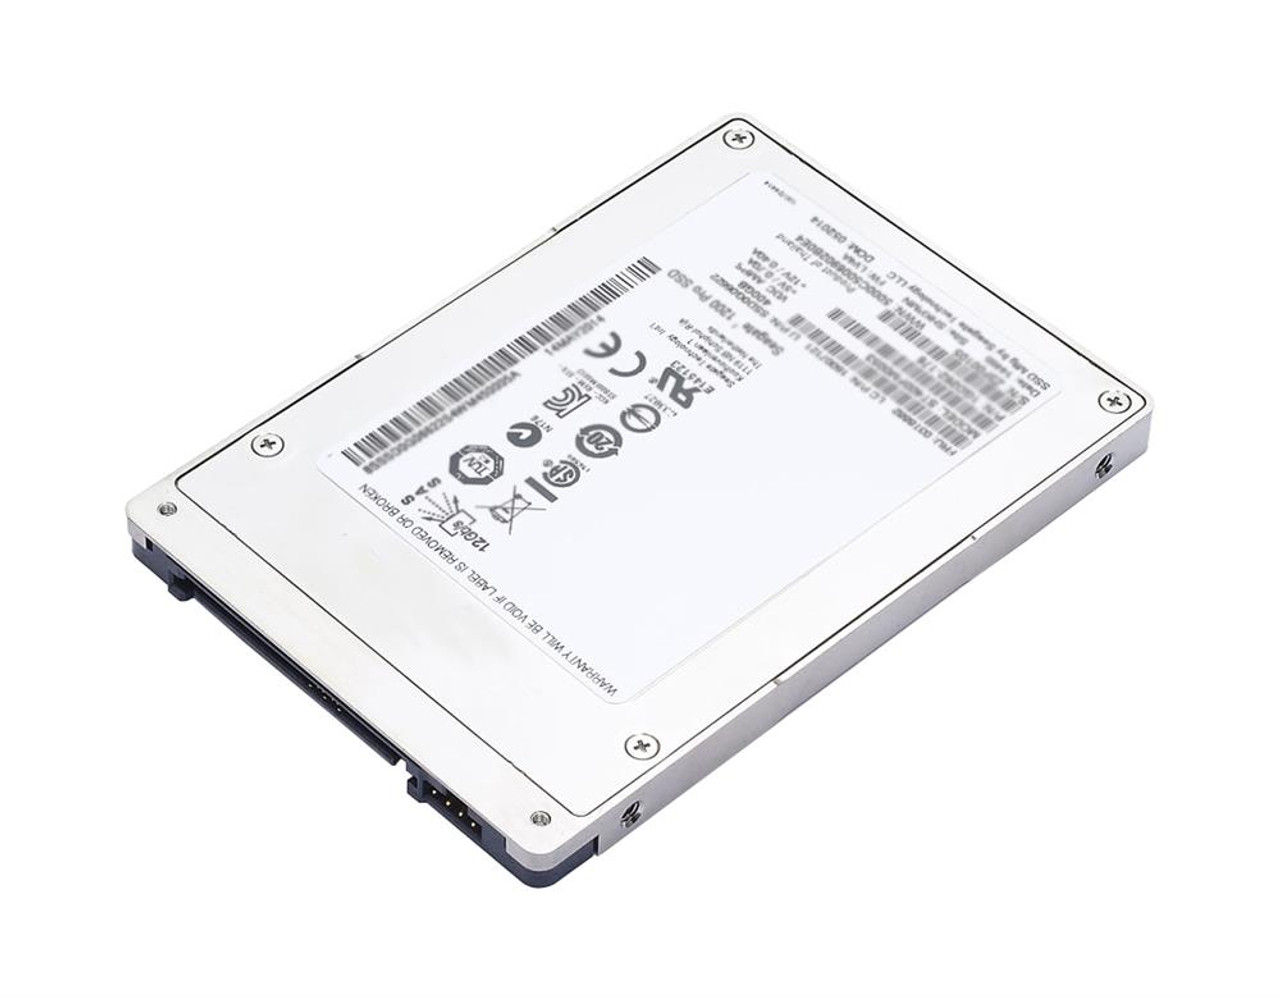 0B47314-NF Lenovo 240GB MLC SATA 6Gbps 2.5-inch Internal Solid State Drive (SSD) for ThinkPad